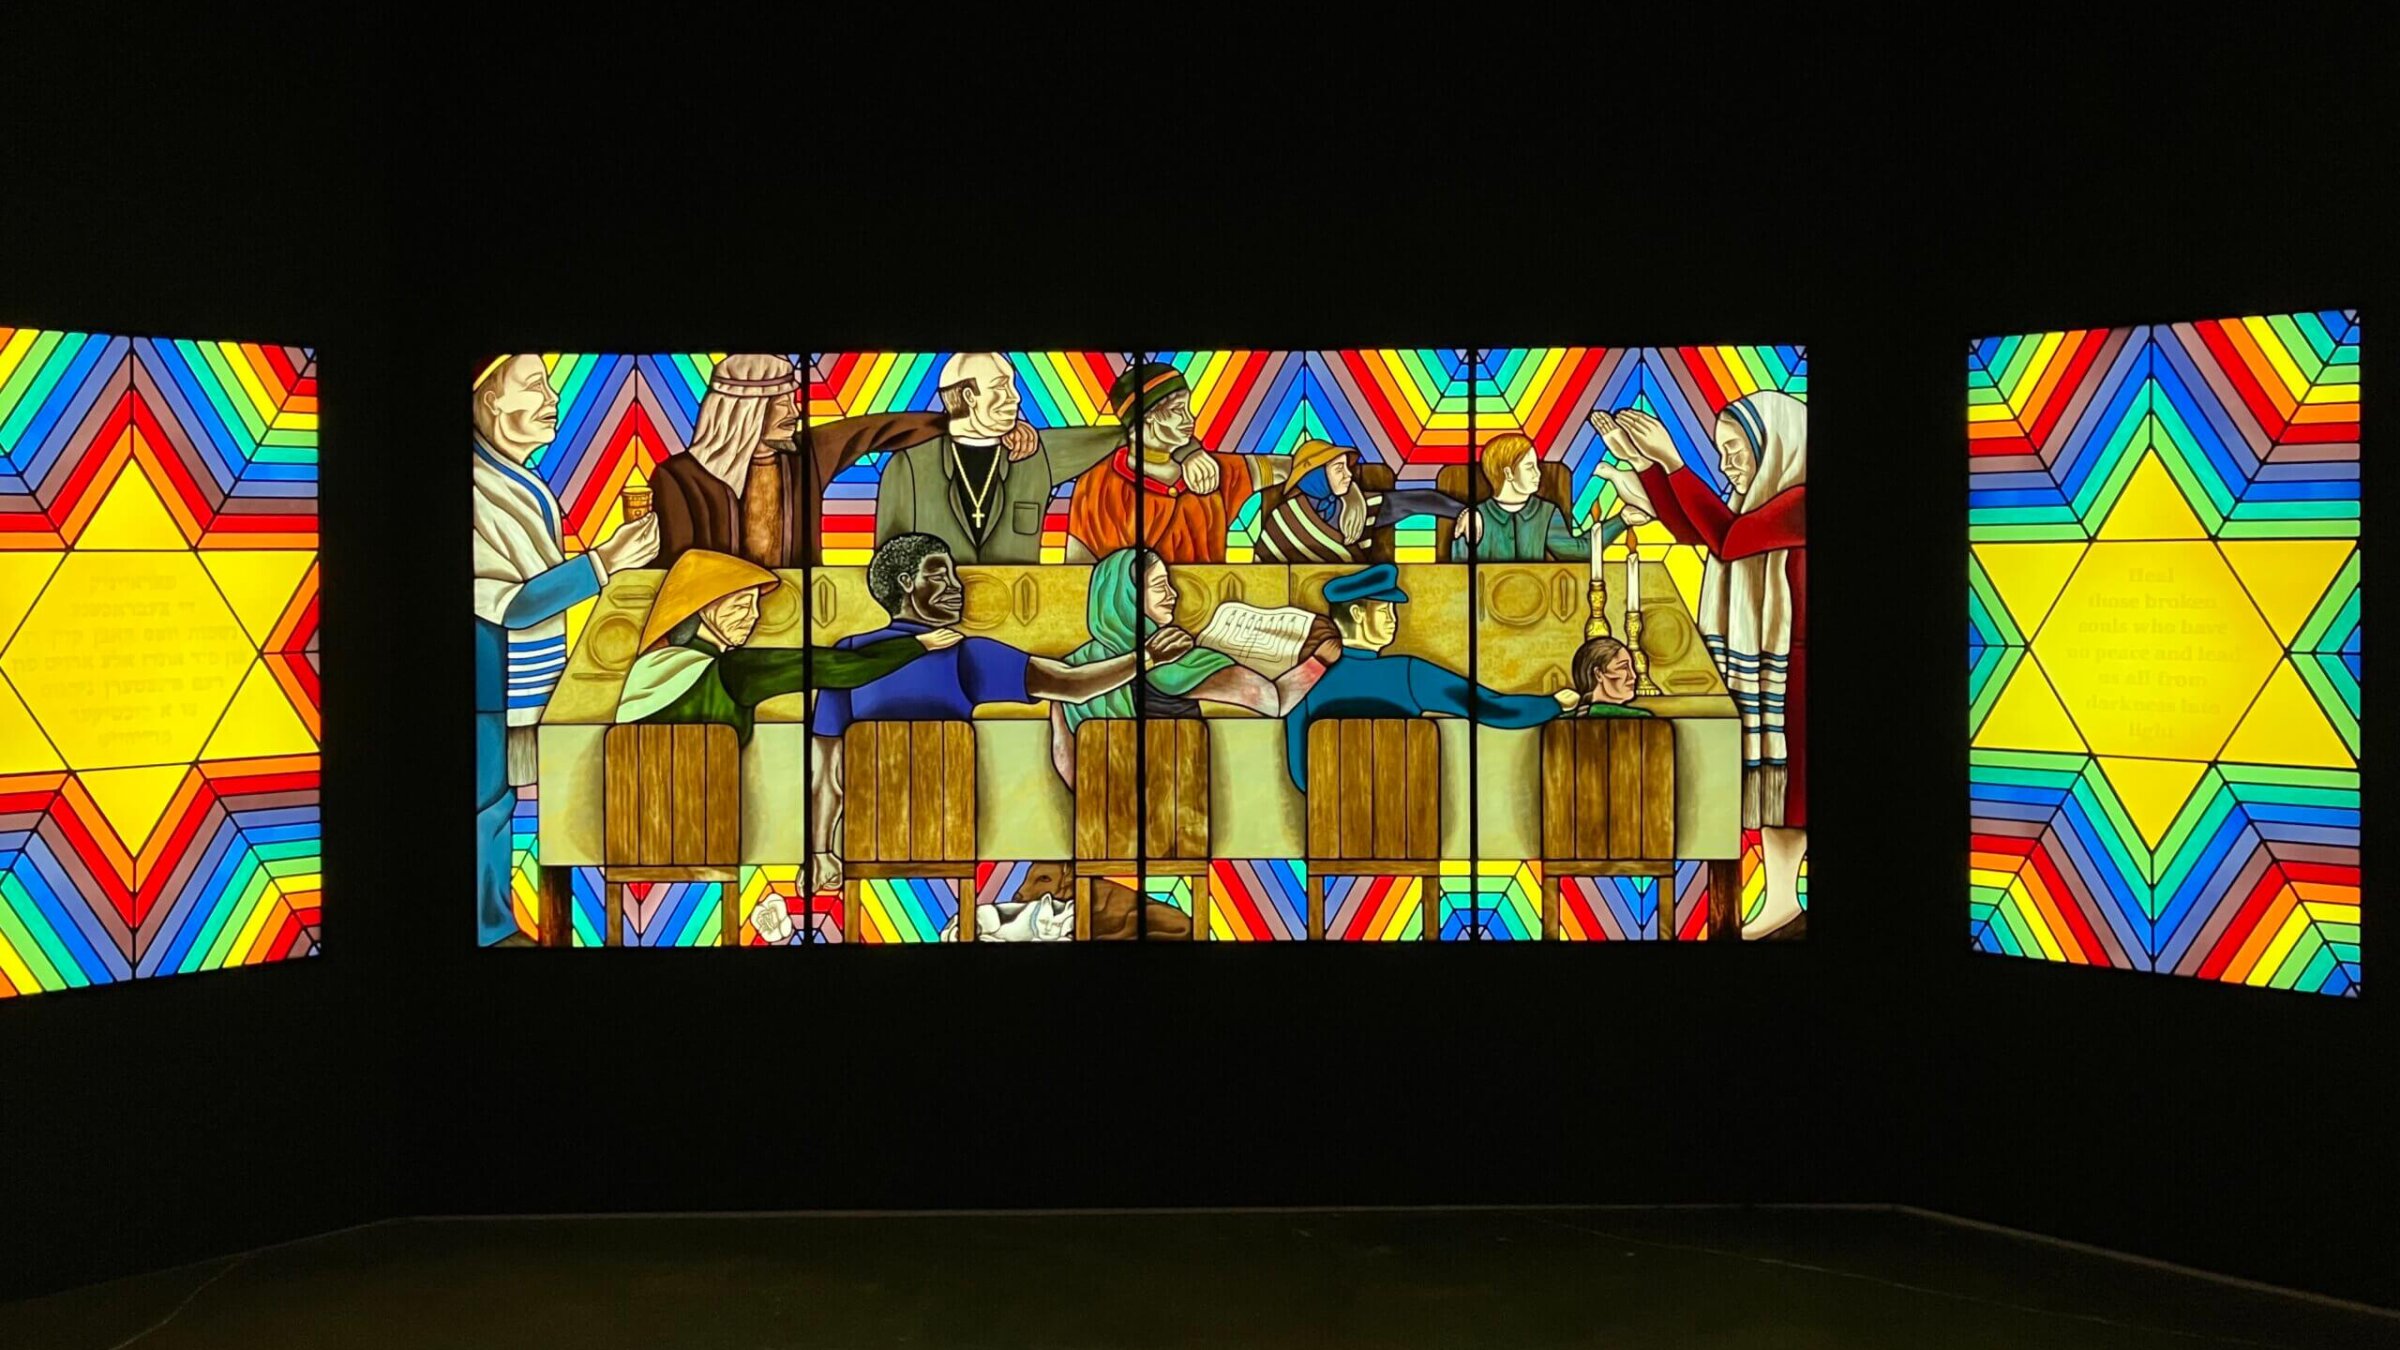 Chicago's stained glass window, showing a multiethnic, multi-religious Shabbat meal.